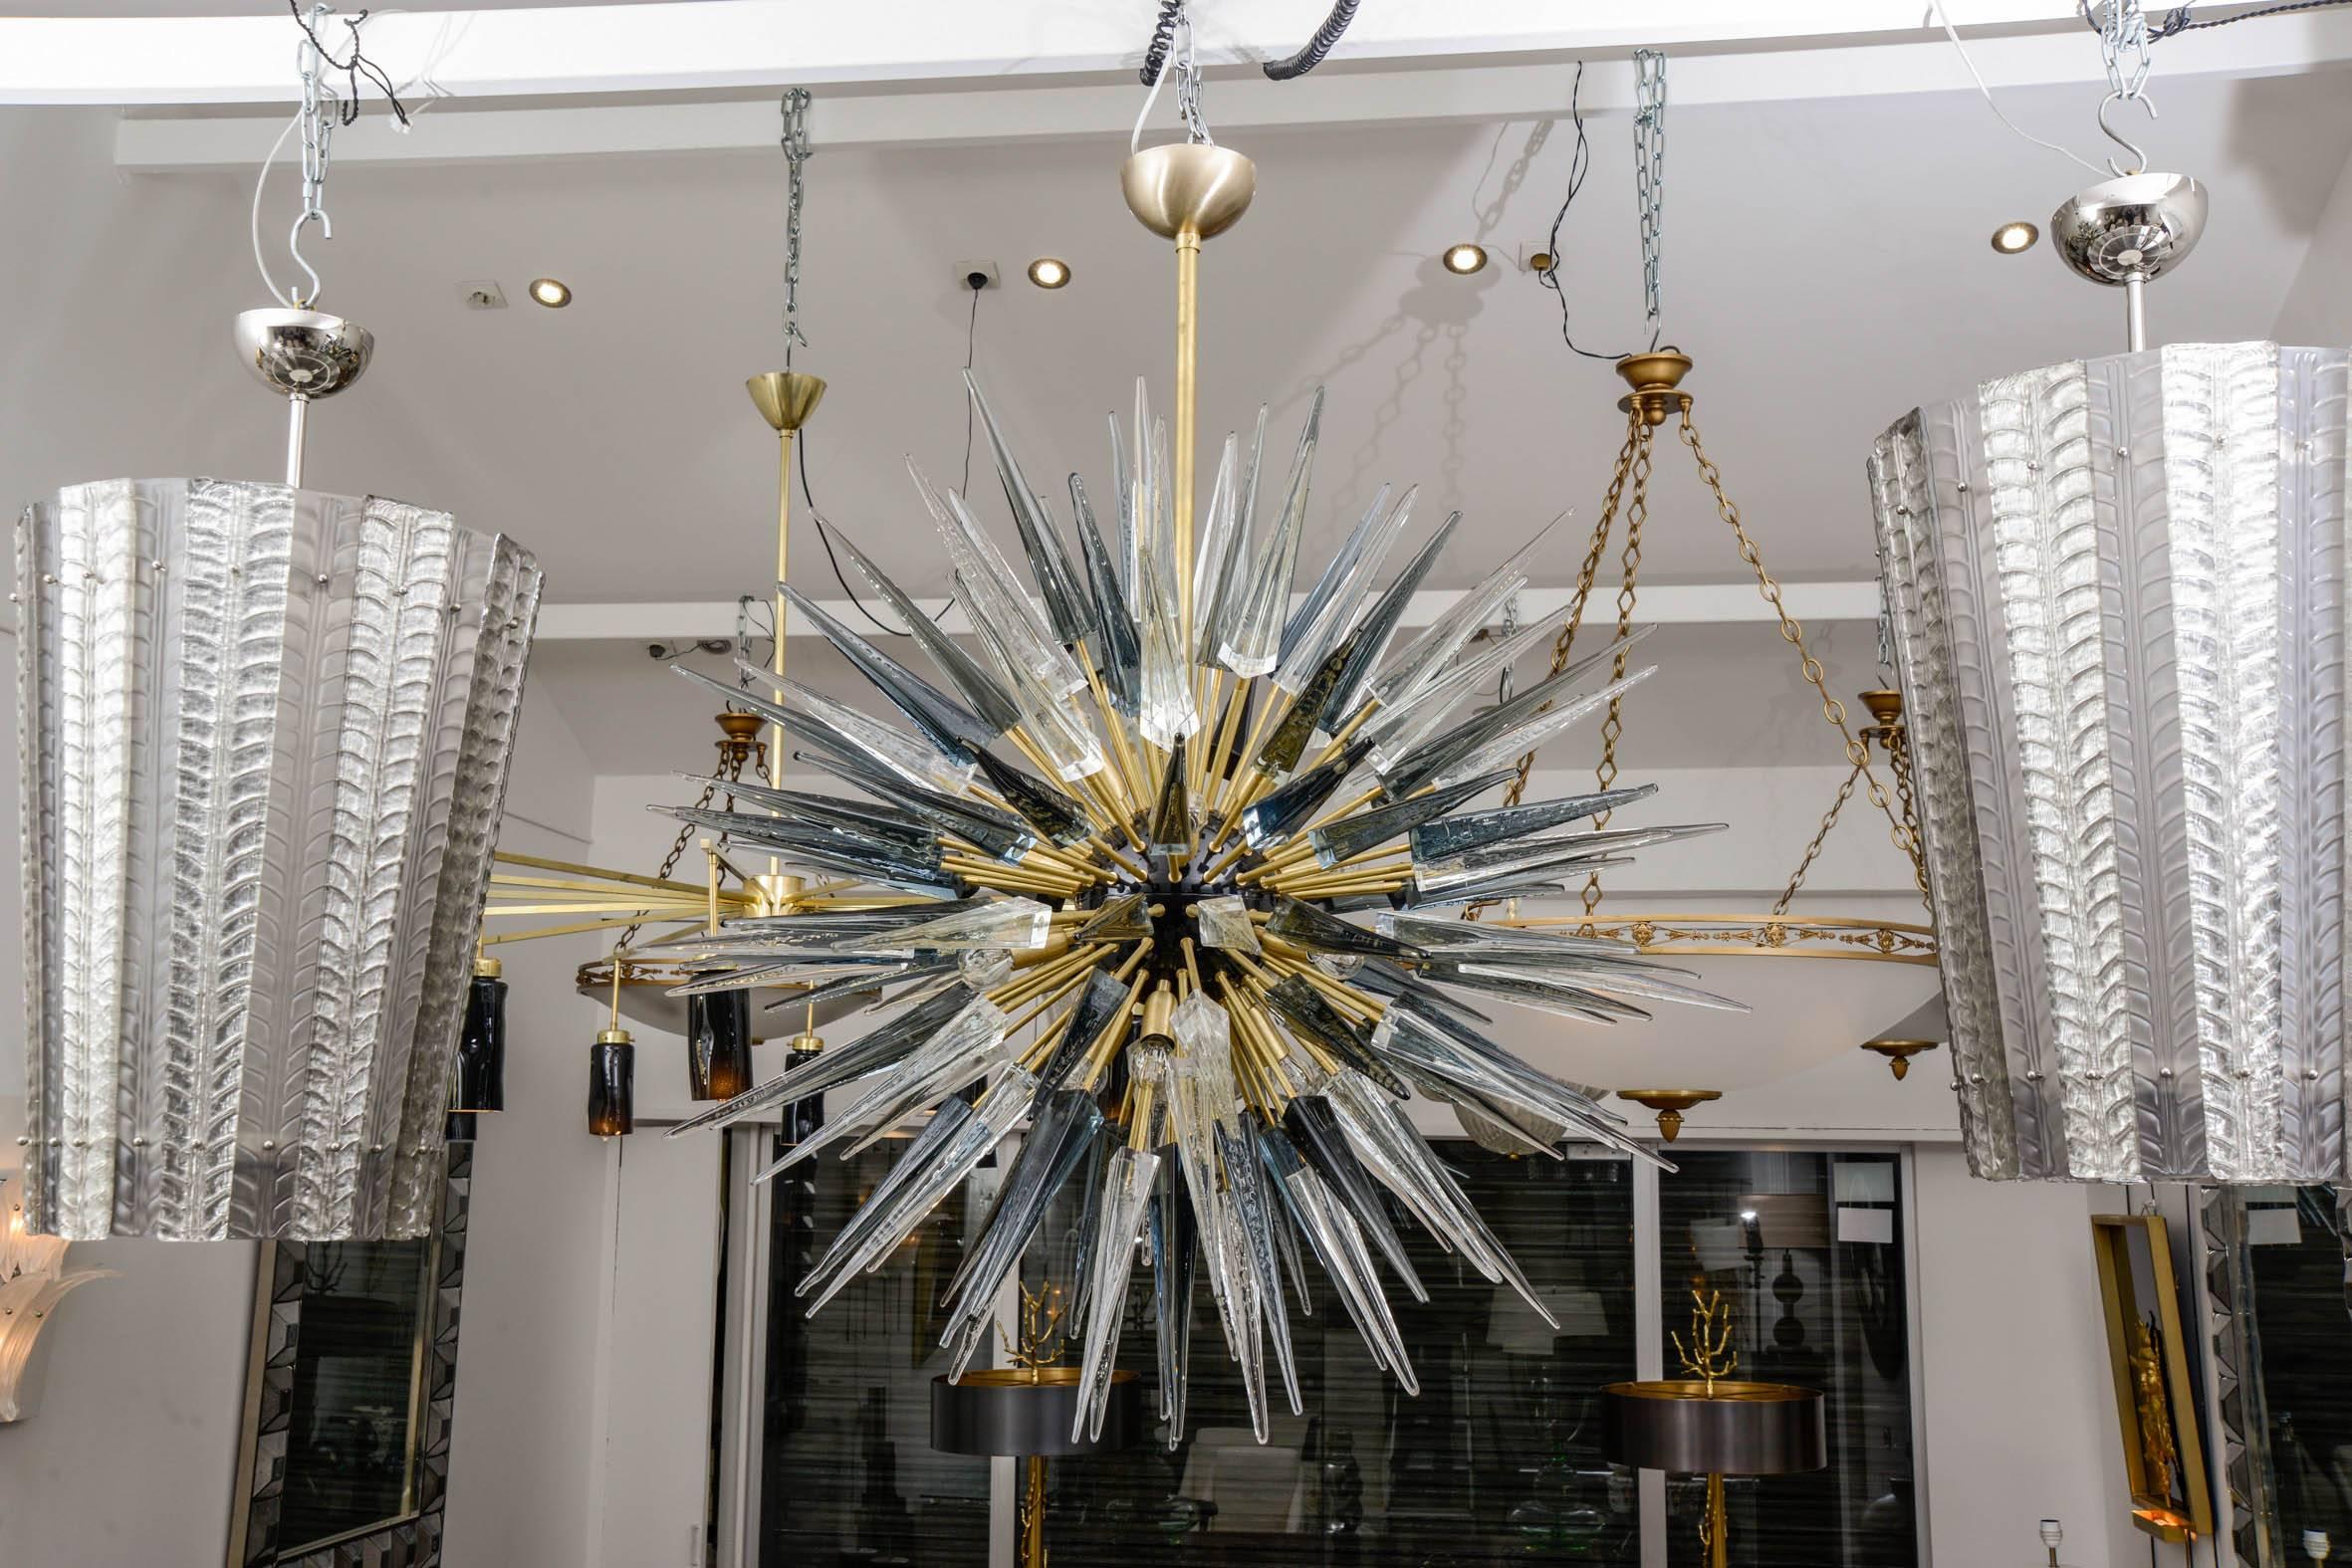 Italian Sputnik chandelier in spiked smoked grey, light grey and clear Murano glass (118 elements). Murano blown glass in a traditional way.
With brass arms fixed on a brass painted black sphere.
12 bulbs.
 